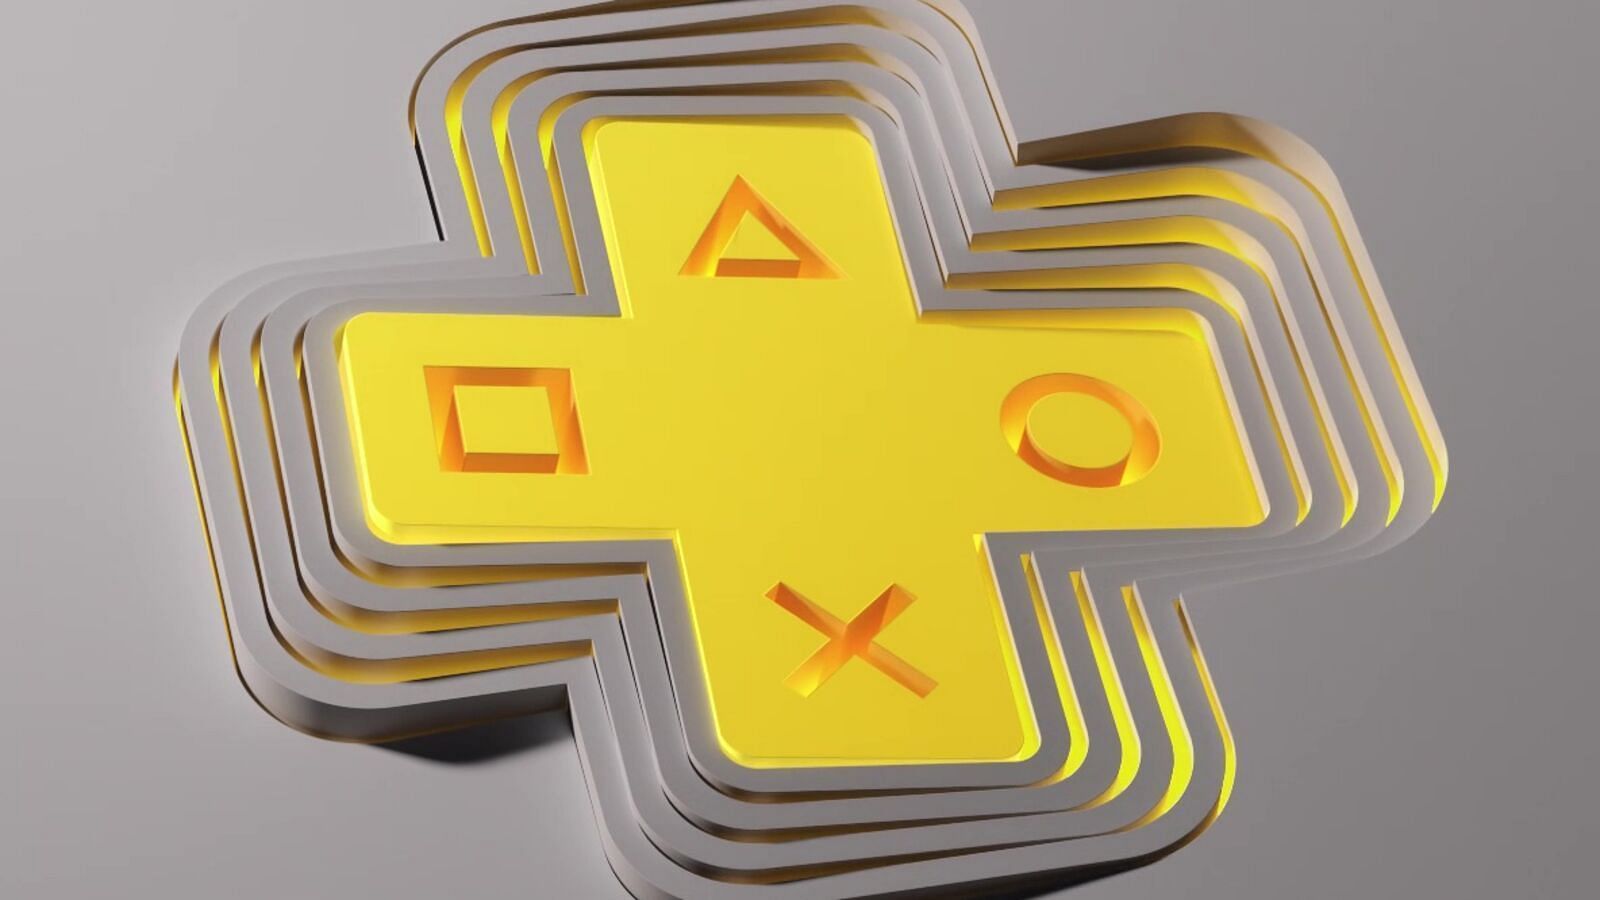 PlayStation Plus Deluxe, Extra, and Essential tiers explained How to play PS4 and PS5 games as